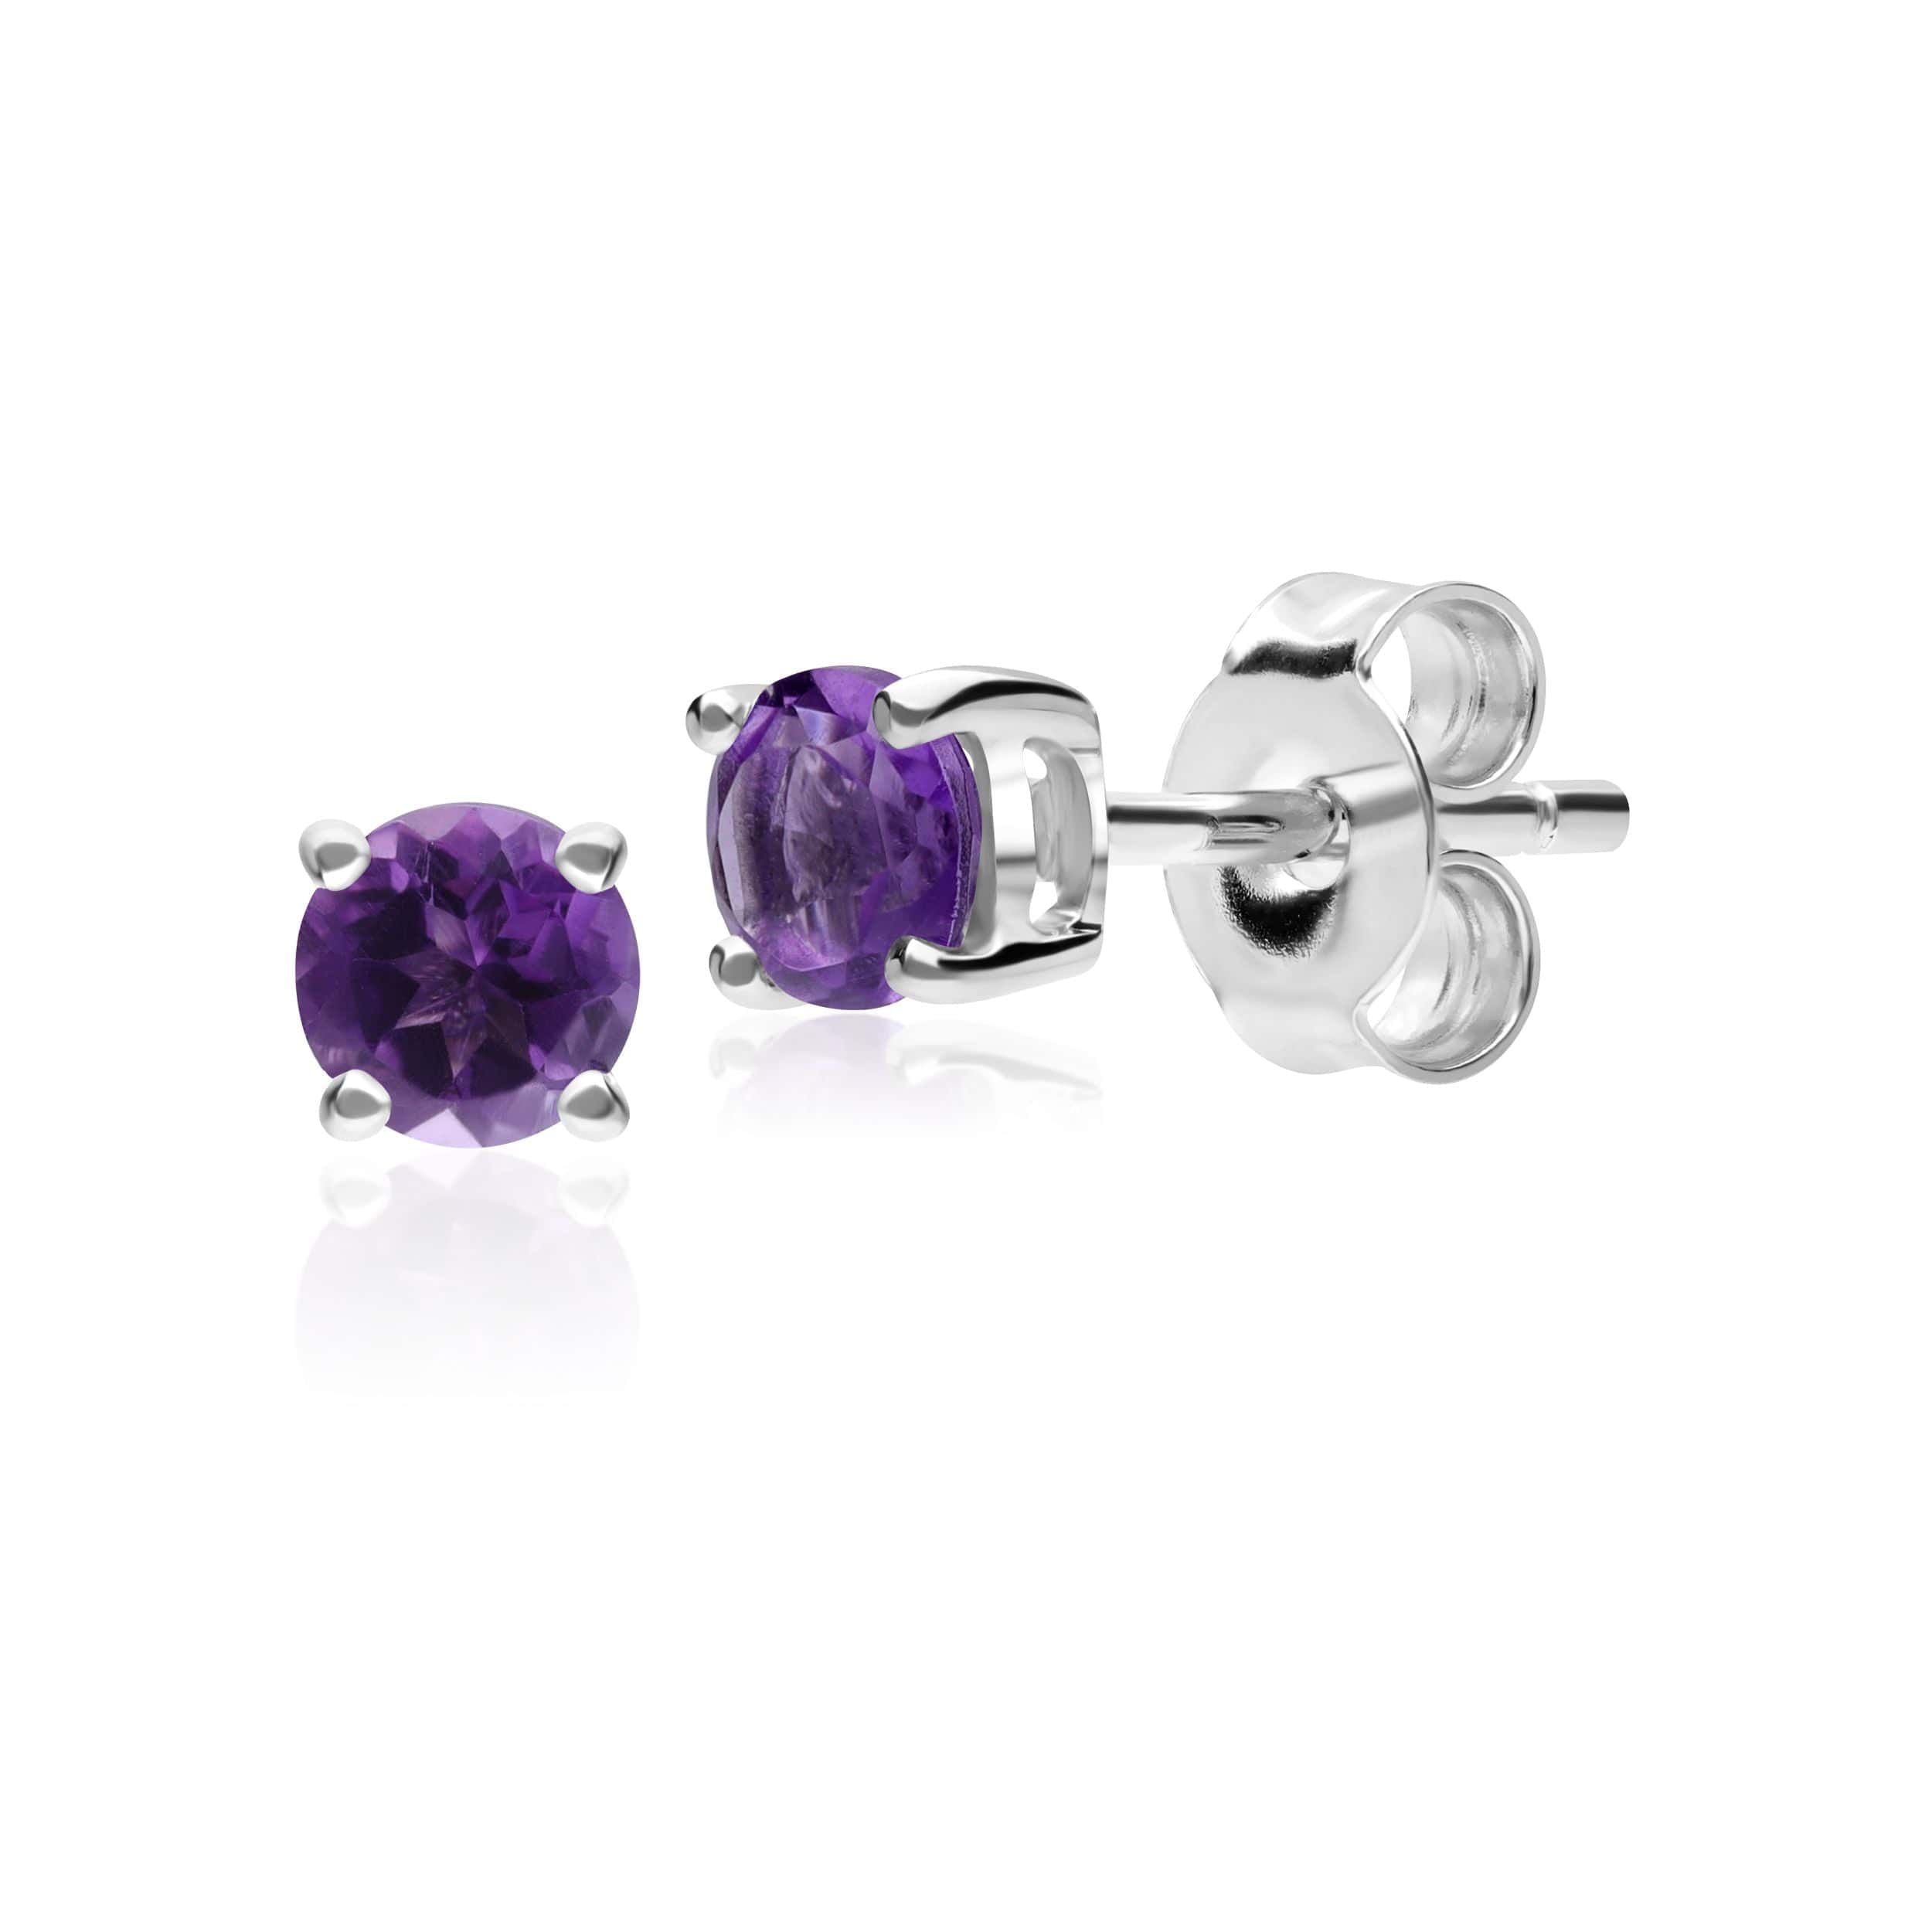 11612 Classic Round Amethyst Stud Earrings in 9ct White Gold 3.5mm 1